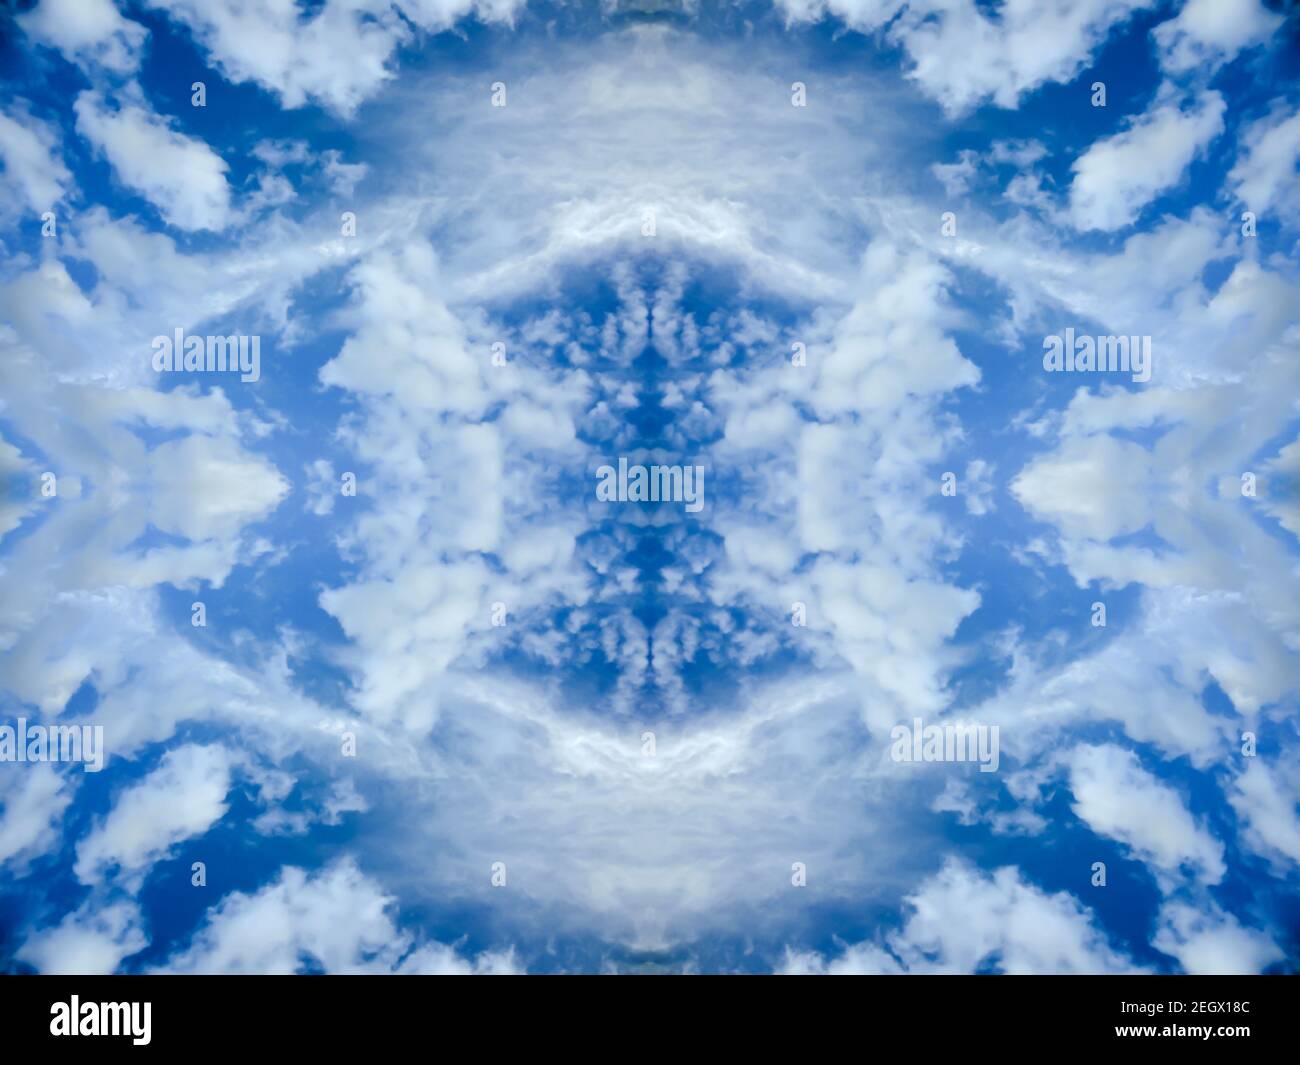 Blue sky with bright clouds. Mirror reflection, textured background with kaleidoscope effect. Abstract natural wallpaper Stock Photo